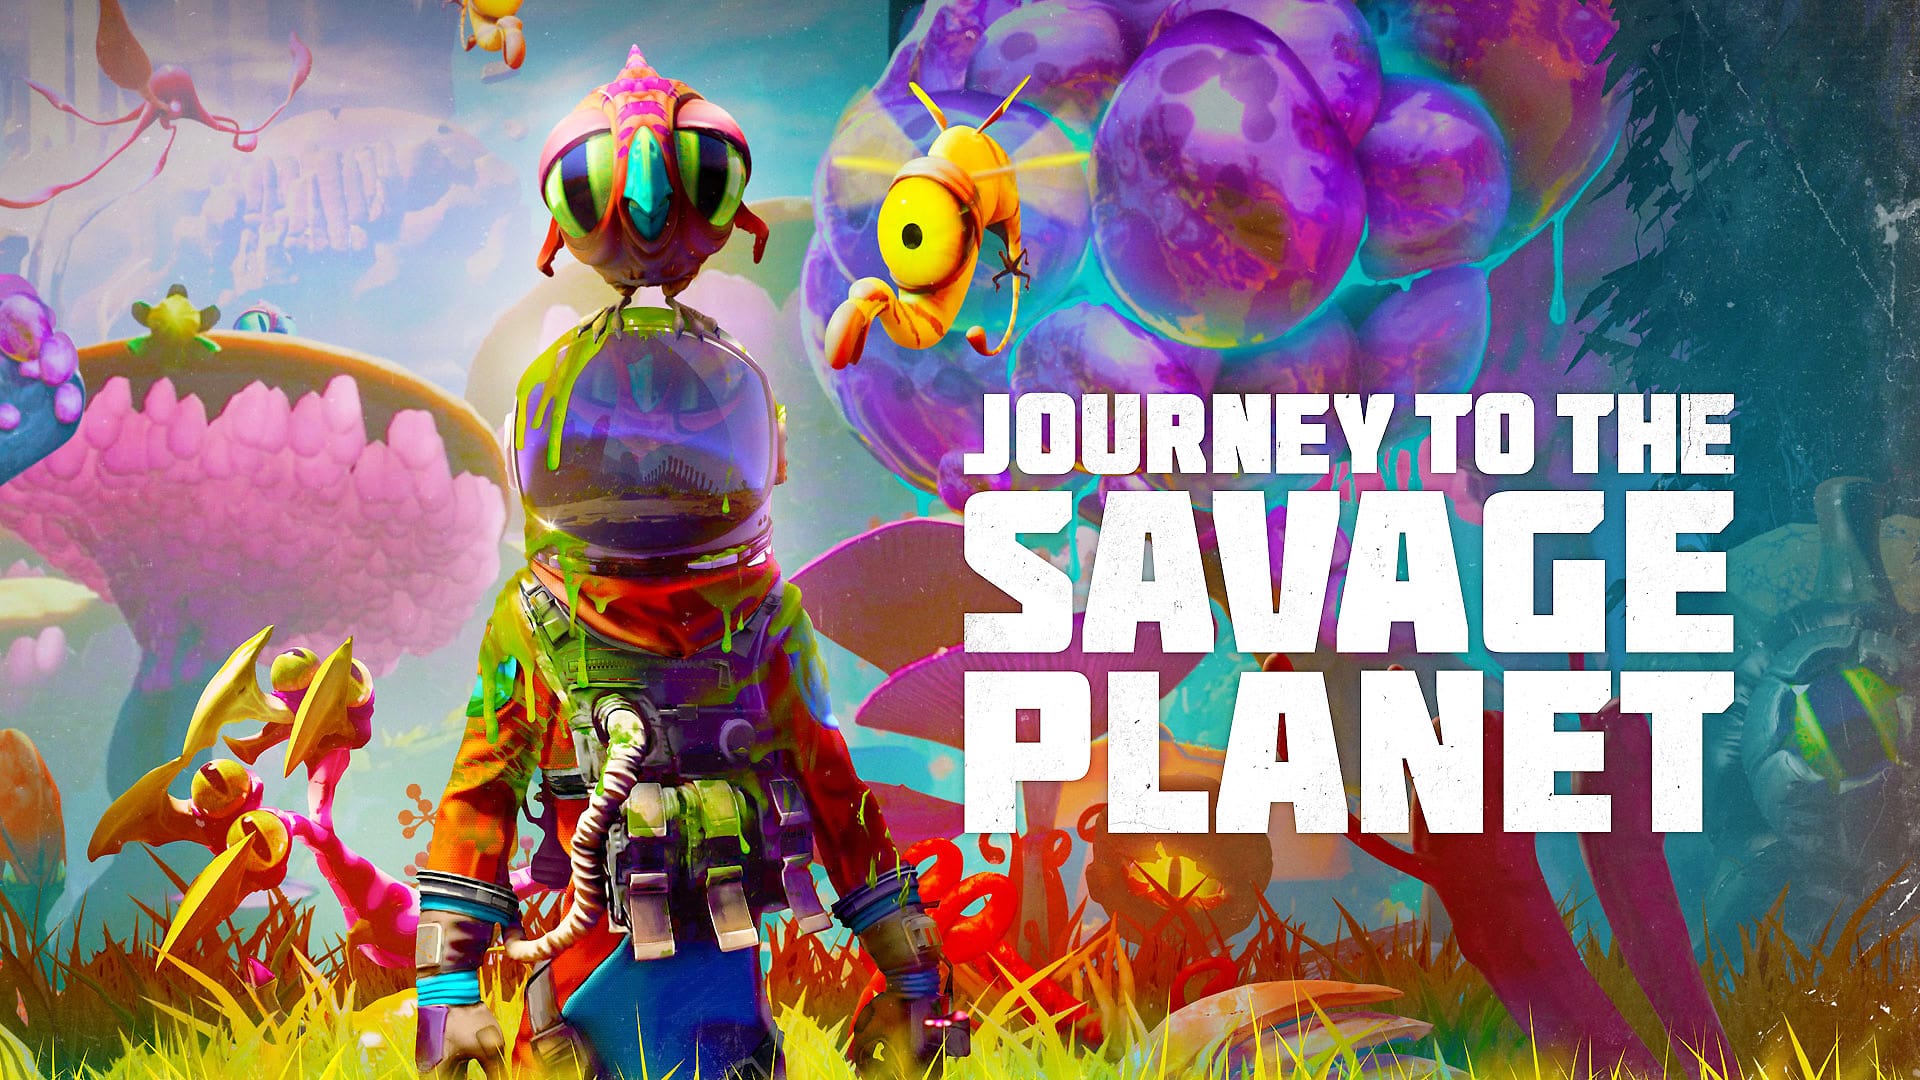 Journey to the savage planet